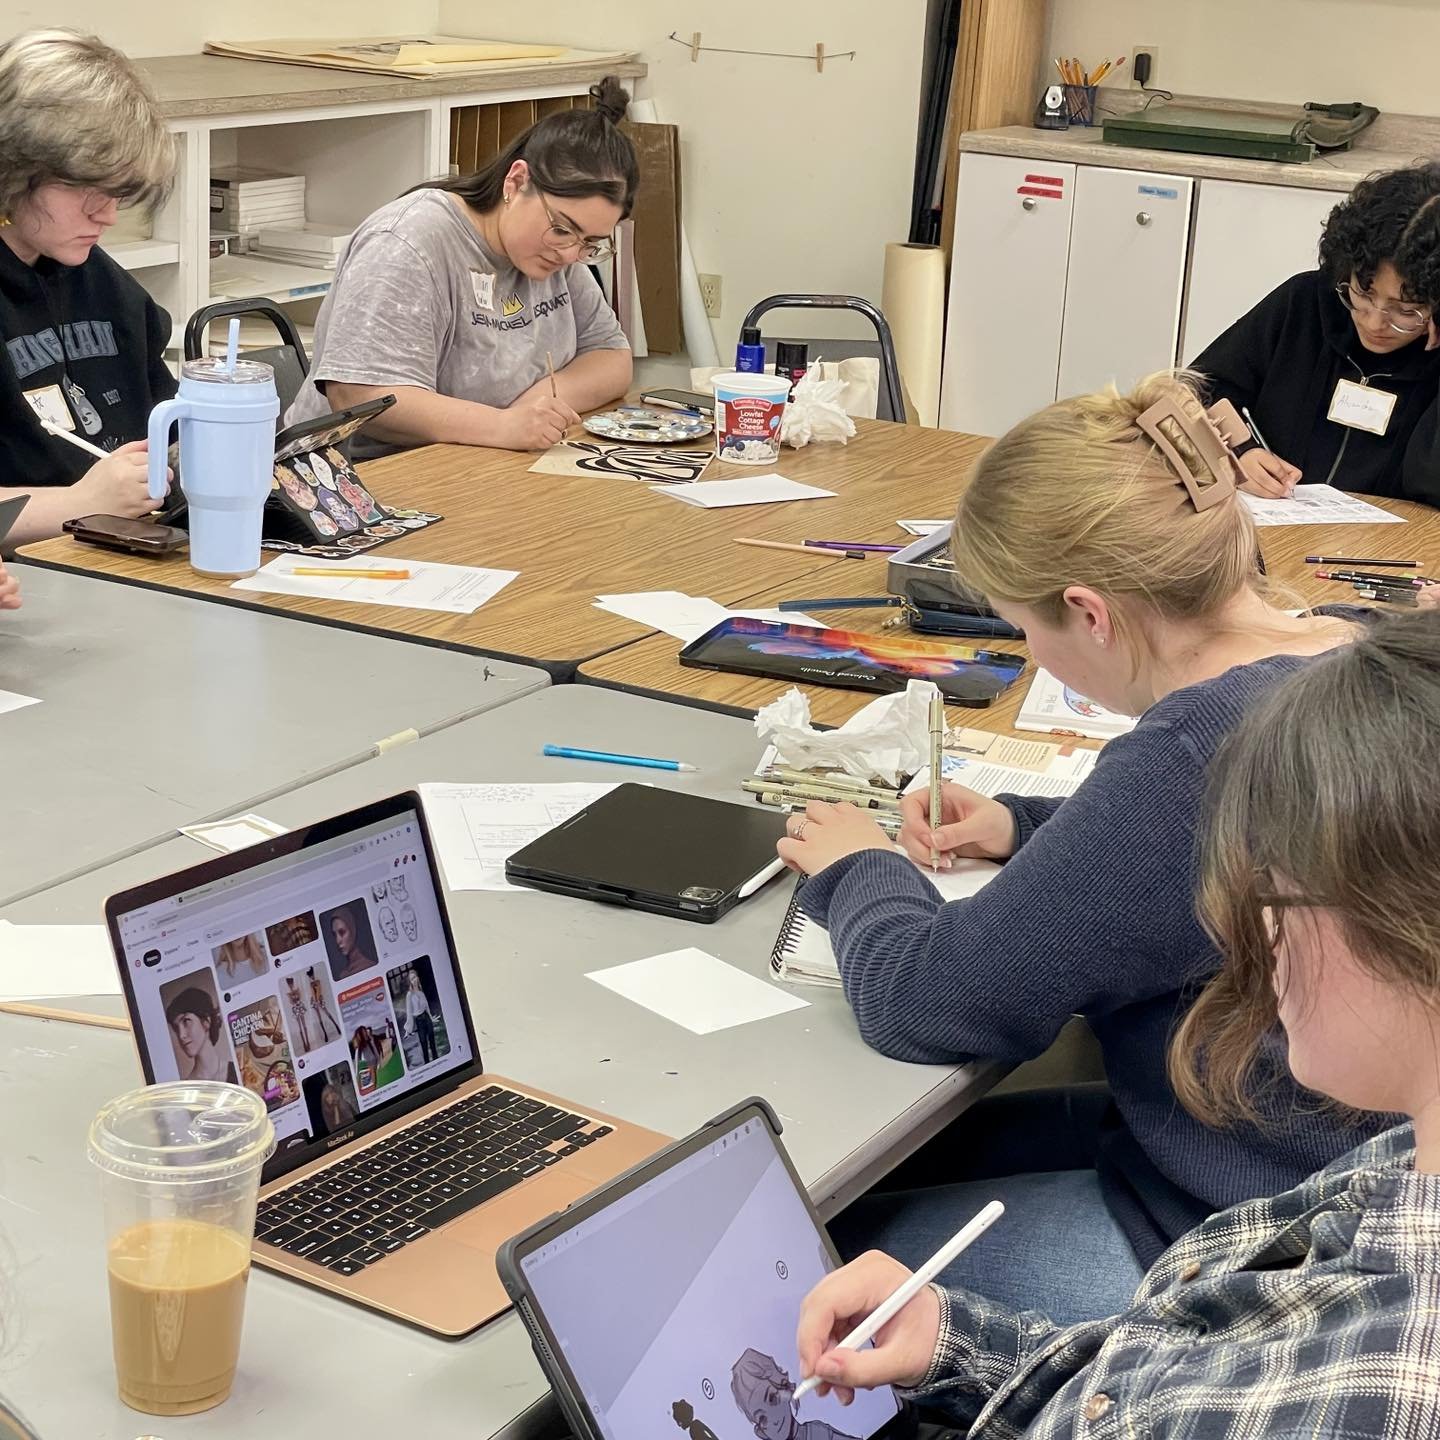 At this week&rsquo;s EAS (Emerging Artists Society) meeting, members discussed what it means to be a &ldquo;professional artist&rdquo;, shared artist opportunities in NWI, and explored ways local artists can contribute to the community through art. E